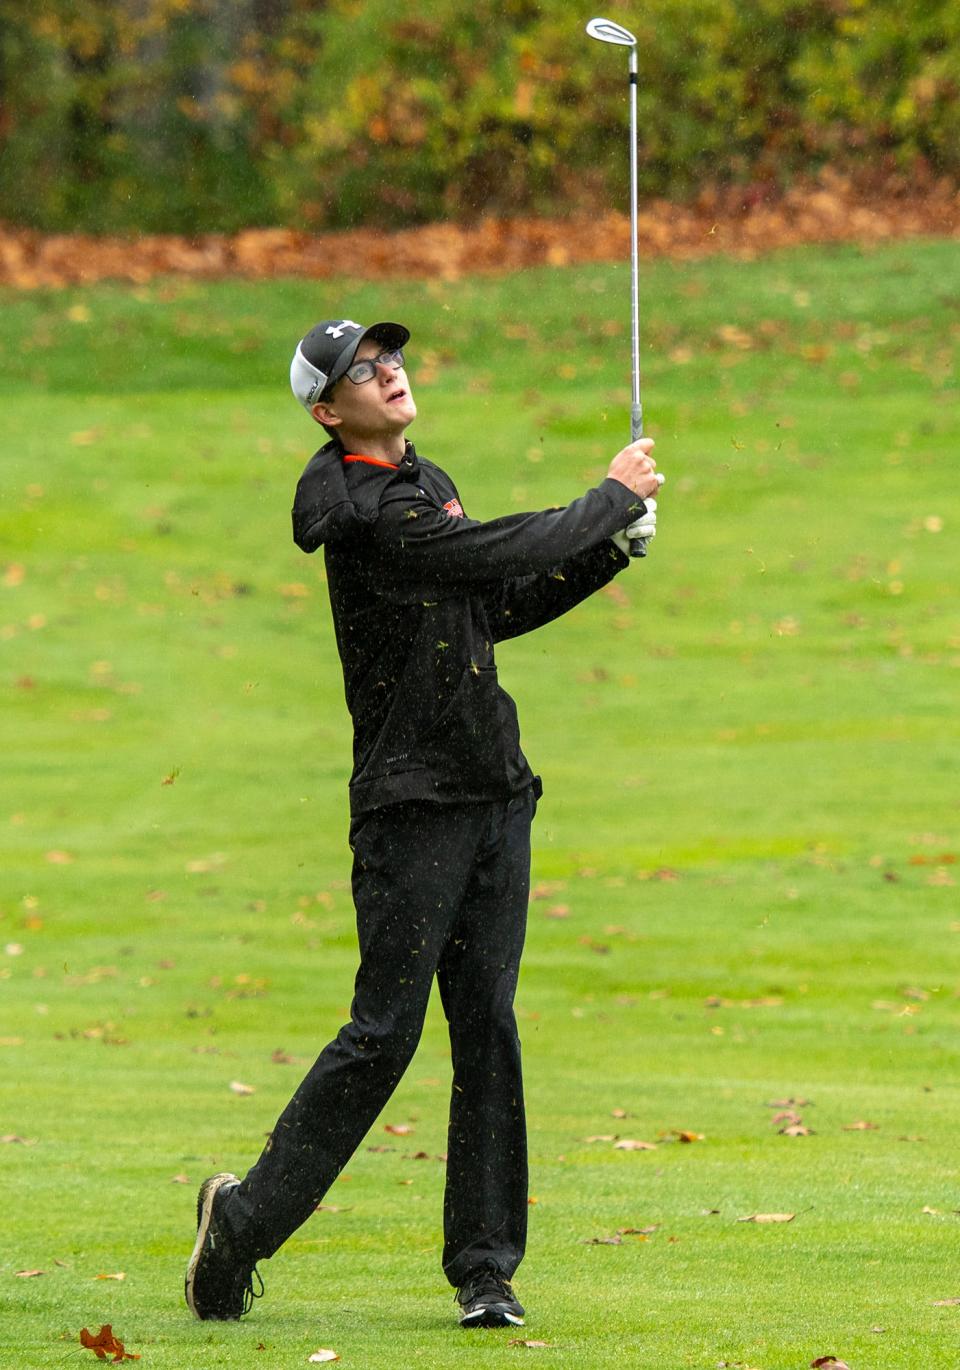 Uxbridge's Cam Caso hits on the 10th fairway during the Division 3 state golf championship at Sterling National. He shot 80 to tie for fifth as an individual.